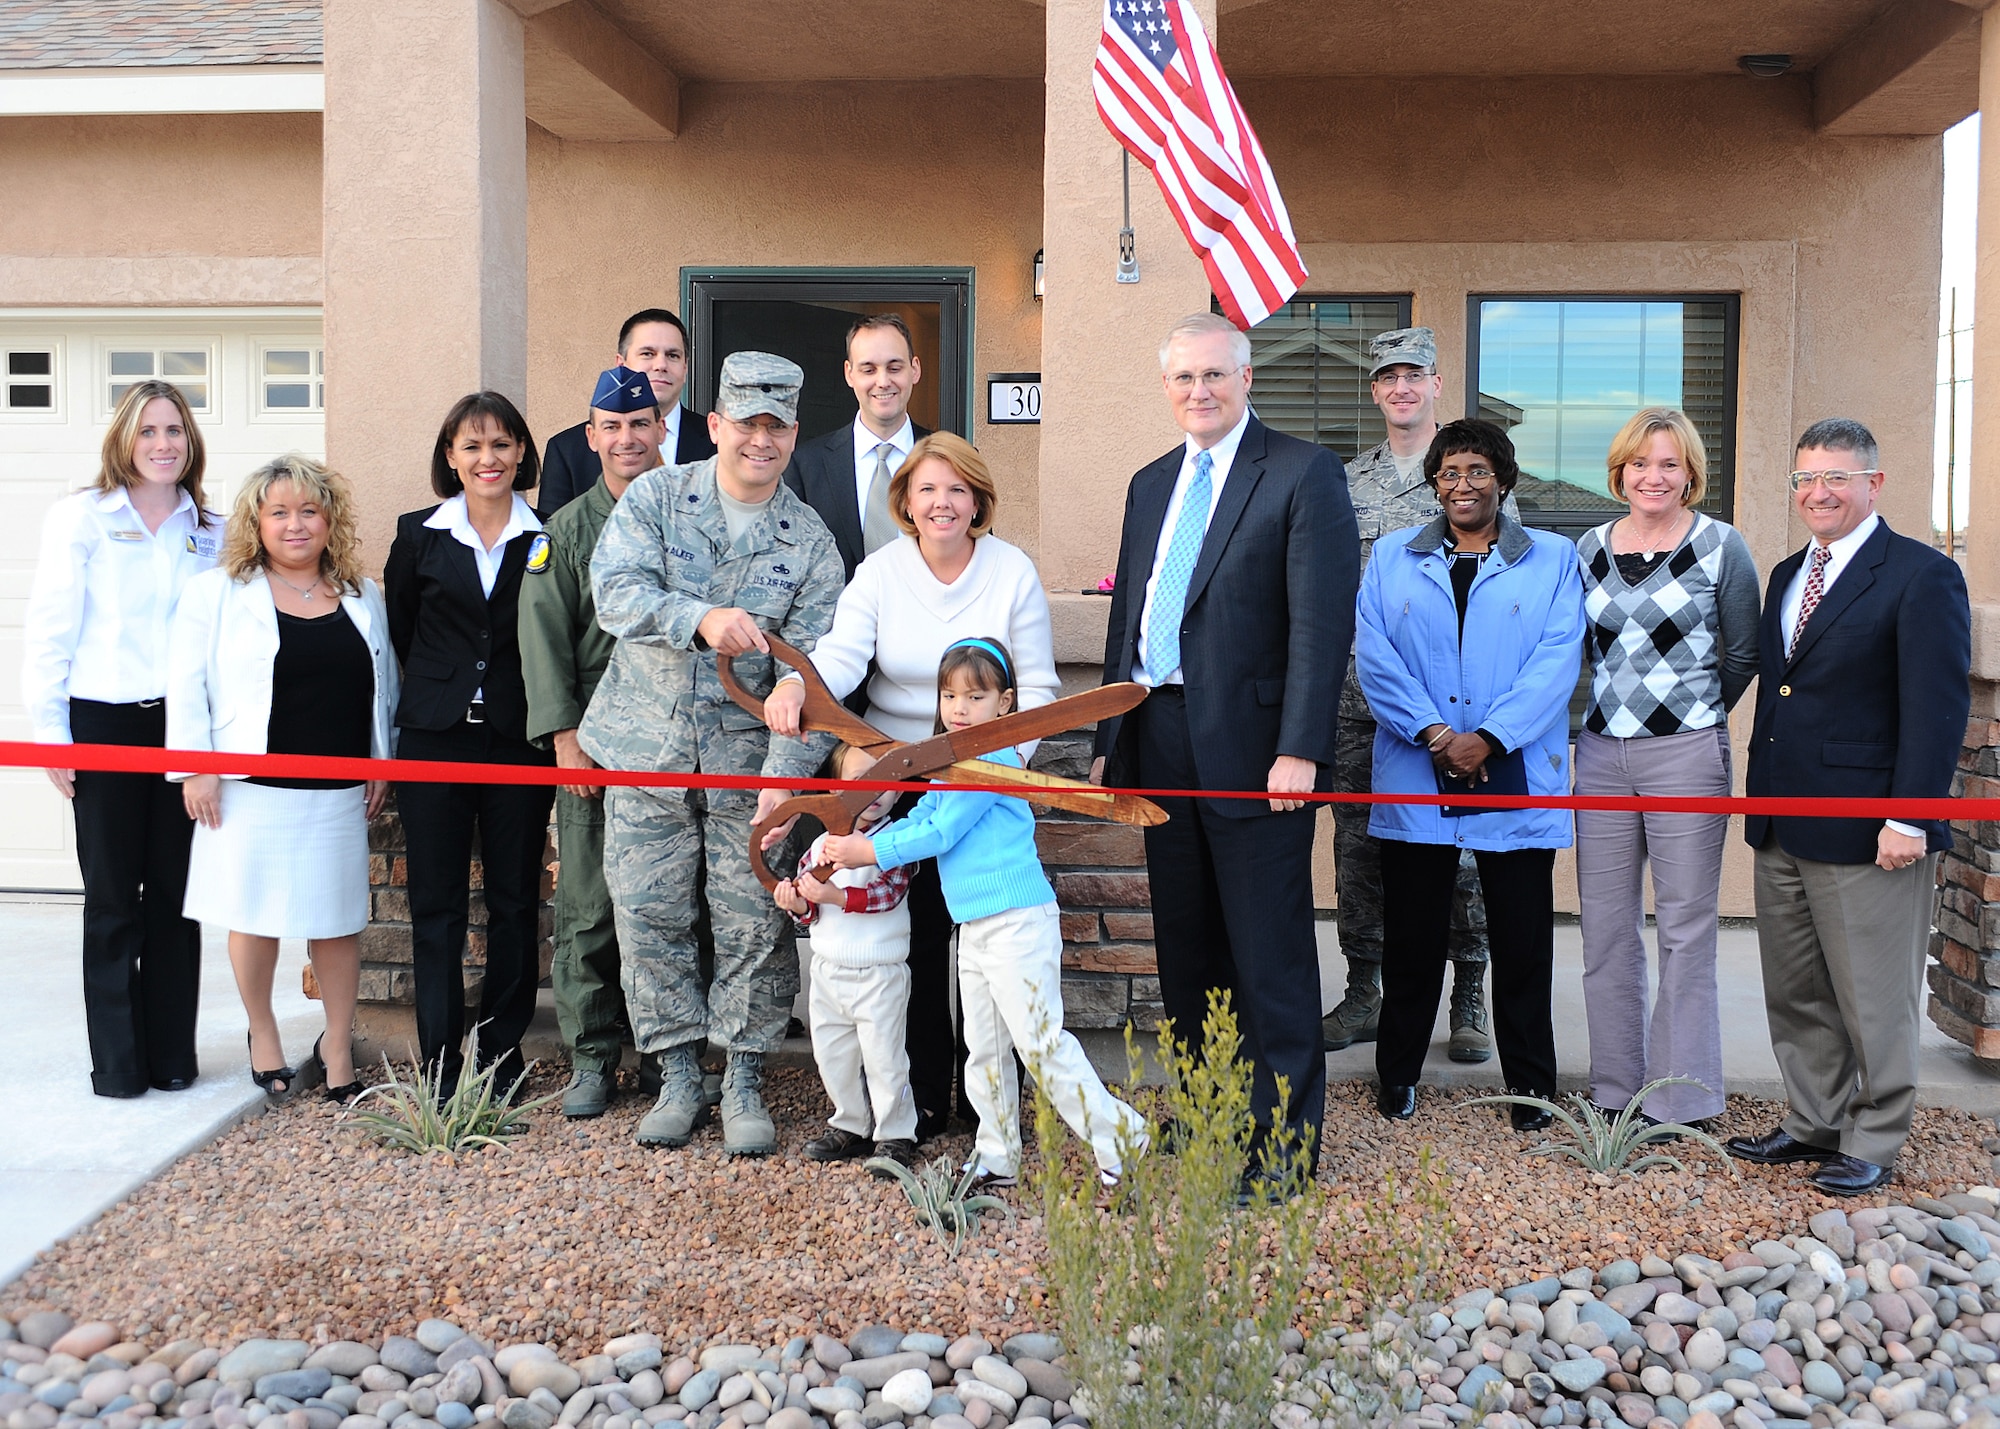 Lt. Col. William Walker 49th Material Maintenance Group and his family prepare to cut the ribbon on their new home at the Soaring Heights Communities ribbon cutting ceremony at Holloman Air Force Base, N.M, Jan. 8. The Walker Family was the first family to enter the new housing.